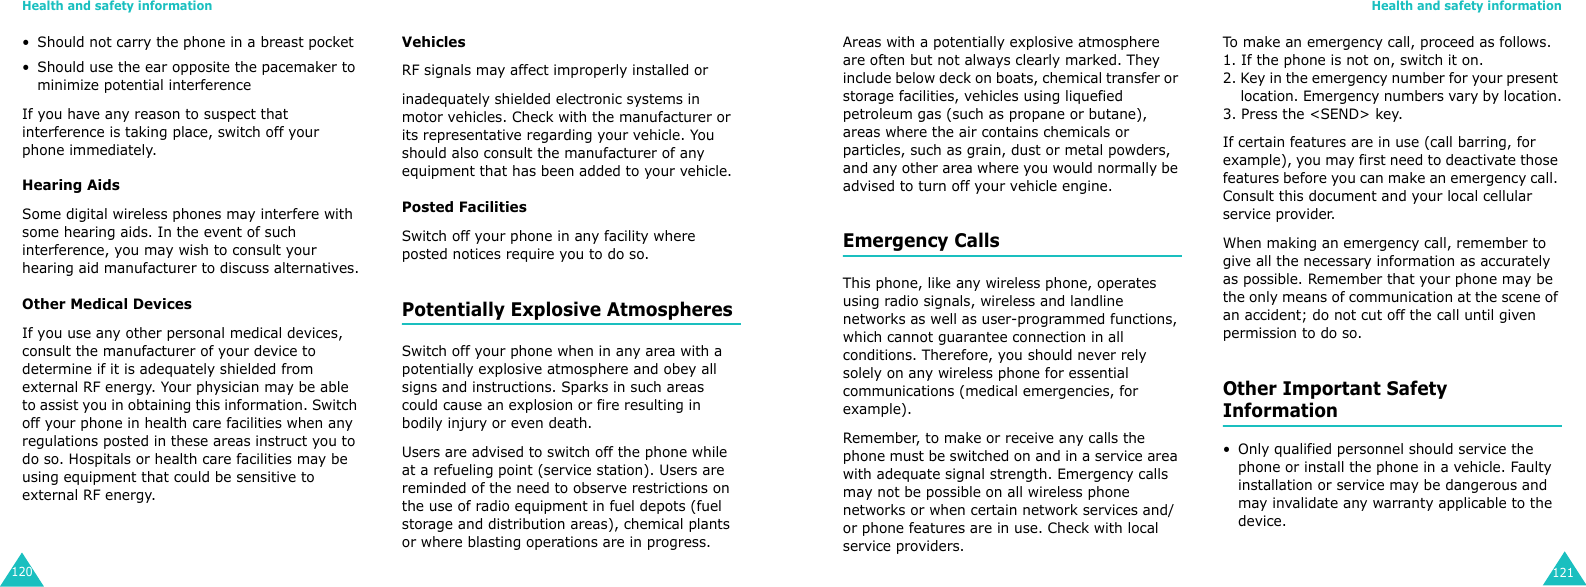 Health and safety information120• Should not carry the phone in a breast pocket• Should use the ear opposite the pacemaker to minimize potential interferenceIf you have any reason to suspect that interference is taking place, switch off your phone immediately.Hearing AidsSome digital wireless phones may interfere with some hearing aids. In the event of such interference, you may wish to consult your hearing aid manufacturer to discuss alternatives.Other Medical DevicesIf you use any other personal medical devices, consult the manufacturer of your device to determine if it is adequately shielded from external RF energy. Your physician may be able to assist you in obtaining this information. Switch off your phone in health care facilities when any regulations posted in these areas instruct you to do so. Hospitals or health care facilities may be using equipment that could be sensitive to external RF energy.VehiclesRF signals may affect improperly installed orinadequately shielded electronic systems in motor vehicles. Check with the manufacturer or its representative regarding your vehicle. You should also consult the manufacturer of any equipment that has been added to your vehicle.Posted FacilitiesSwitch off your phone in any facility where posted notices require you to do so.Potentially Explosive AtmospheresSwitch off your phone when in any area with a potentially explosive atmosphere and obey all signs and instructions. Sparks in such areas could cause an explosion or fire resulting in bodily injury or even death.Users are advised to switch off the phone while at a refueling point (service station). Users are reminded of the need to observe restrictions on the use of radio equipment in fuel depots (fuel storage and distribution areas), chemical plants or where blasting operations are in progress.Health and safety information121Areas with a potentially explosive atmosphere are often but not always clearly marked. They include below deck on boats, chemical transfer or storage facilities, vehicles using liquefied petroleum gas (such as propane or butane), areas where the air contains chemicals or particles, such as grain, dust or metal powders, and any other area where you would normally be advised to turn off your vehicle engine.Emergency CallsThis phone, like any wireless phone, operates using radio signals, wireless and landline networks as well as user-programmed functions, which cannot guarantee connection in all conditions. Therefore, you should never rely solely on any wireless phone for essential communications (medical emergencies, for example).Remember, to make or receive any calls the phone must be switched on and in a service area with adequate signal strength. Emergency calls may not be possible on all wireless phone networks or when certain network services and/or phone features are in use. Check with local service providers.To make an emergency call, proceed as follows.1. If the phone is not on, switch it on.2. Key in the emergency number for your present     location. Emergency numbers vary by location.3. Press the &lt;SEND&gt; key.If certain features are in use (call barring, for example), you may first need to deactivate those features before you can make an emergency call. Consult this document and your local cellular service provider.When making an emergency call, remember to give all the necessary information as accurately as possible. Remember that your phone may be the only means of communication at the scene of an accident; do not cut off the call until given permission to do so.Other Important Safety Information• Only qualified personnel should service the phone or install the phone in a vehicle. Faulty installation or service may be dangerous and may invalidate any warranty applicable to the device.